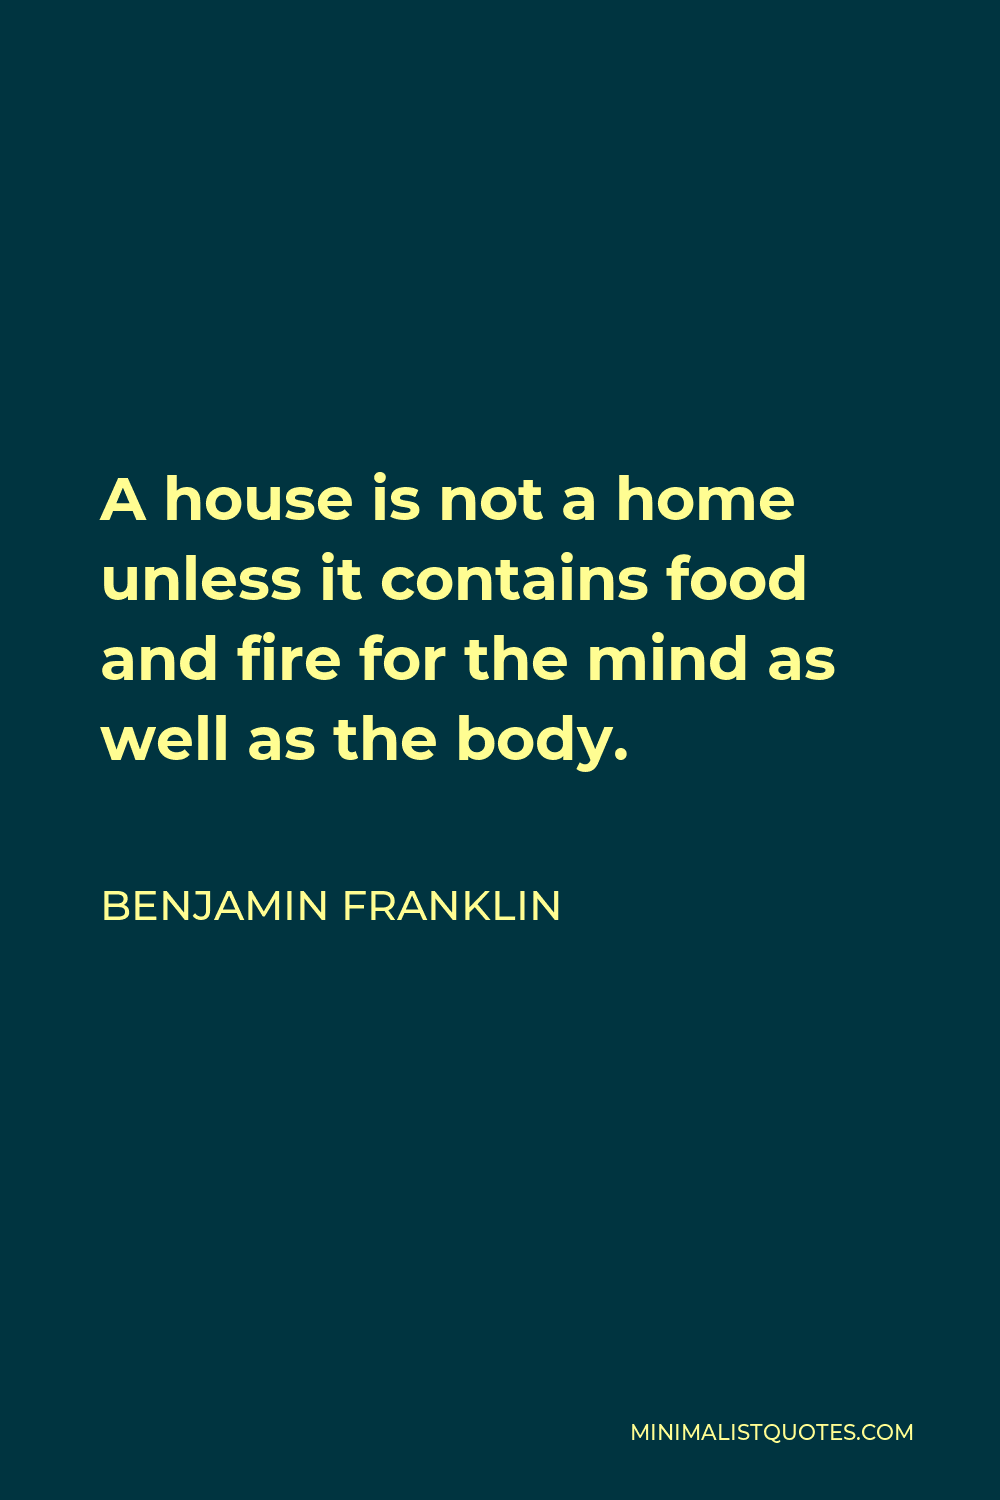 Benjamin Franklin Quote - A house is not a home unless it contains food and fire for the mind as well as the body.